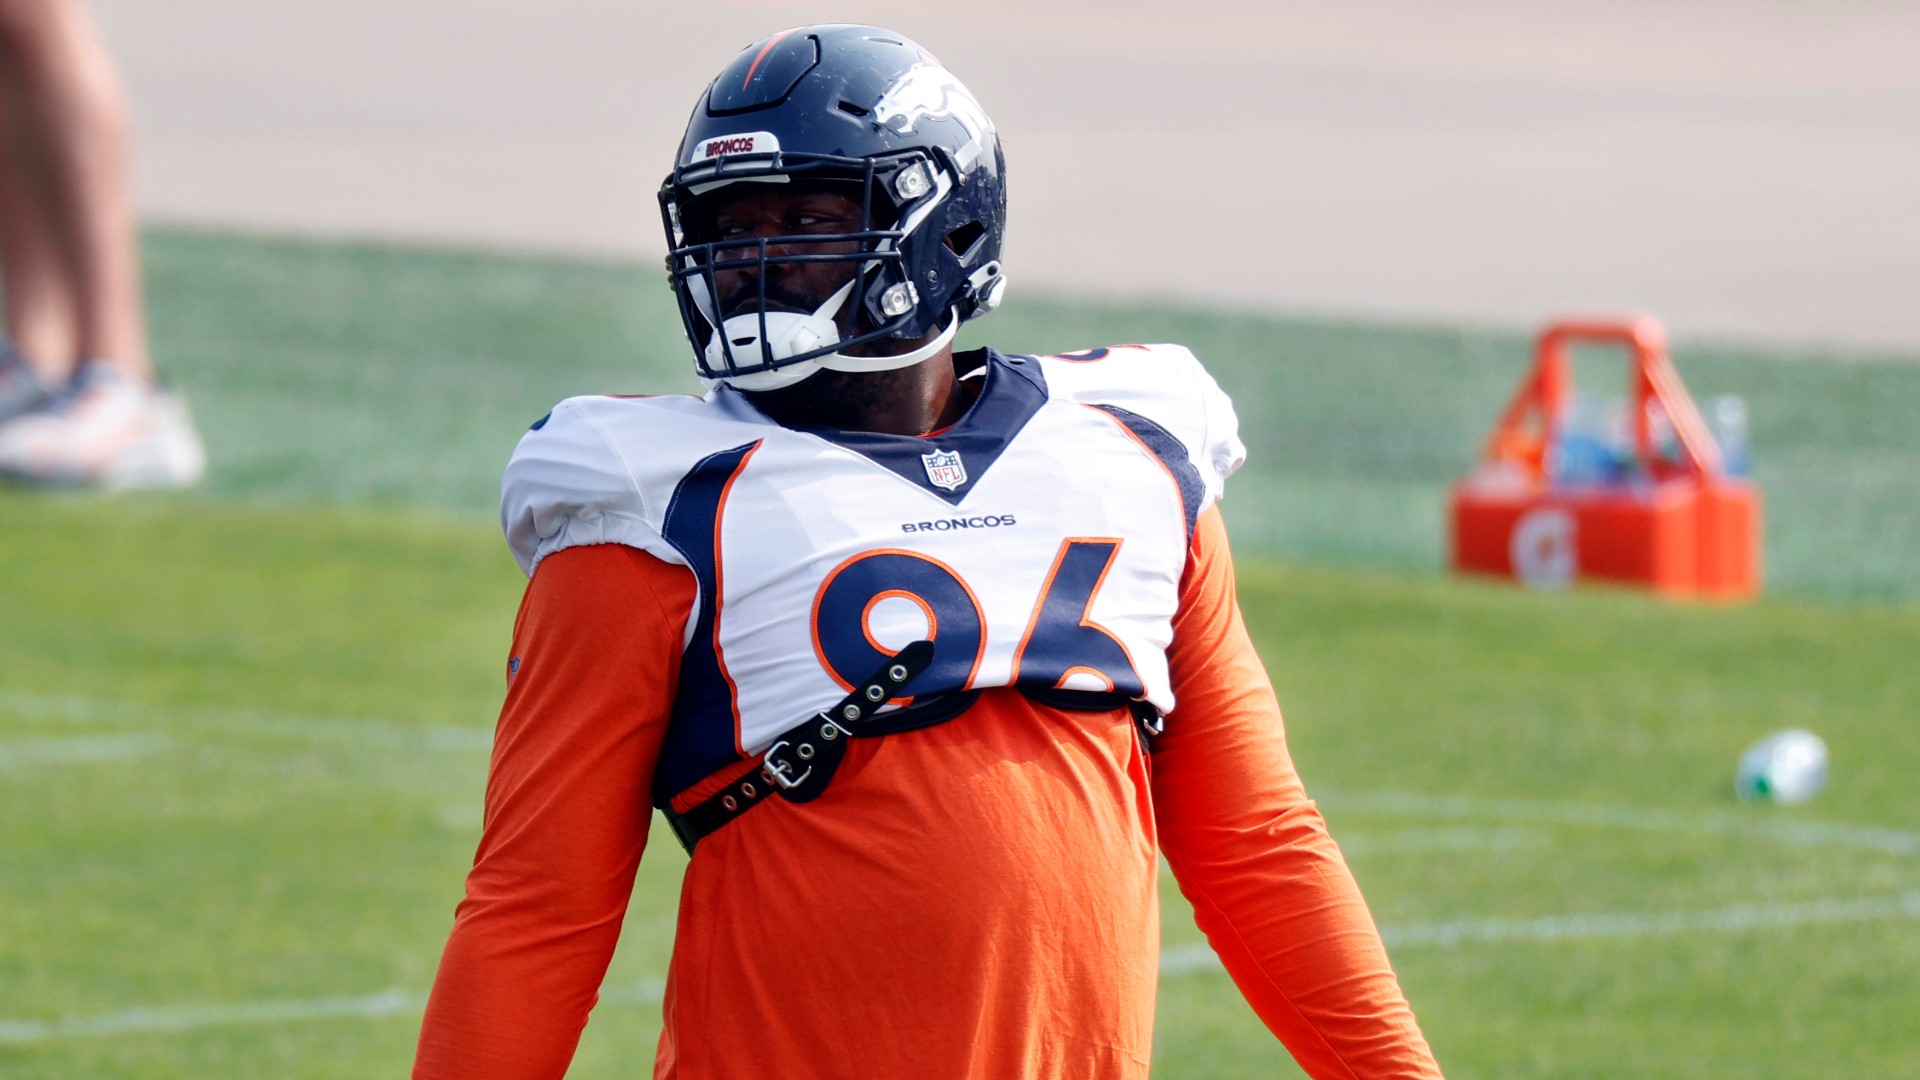 The Denver defensive end is a native of Milwaukee, close to where the Jacob Blake shooting occurred.